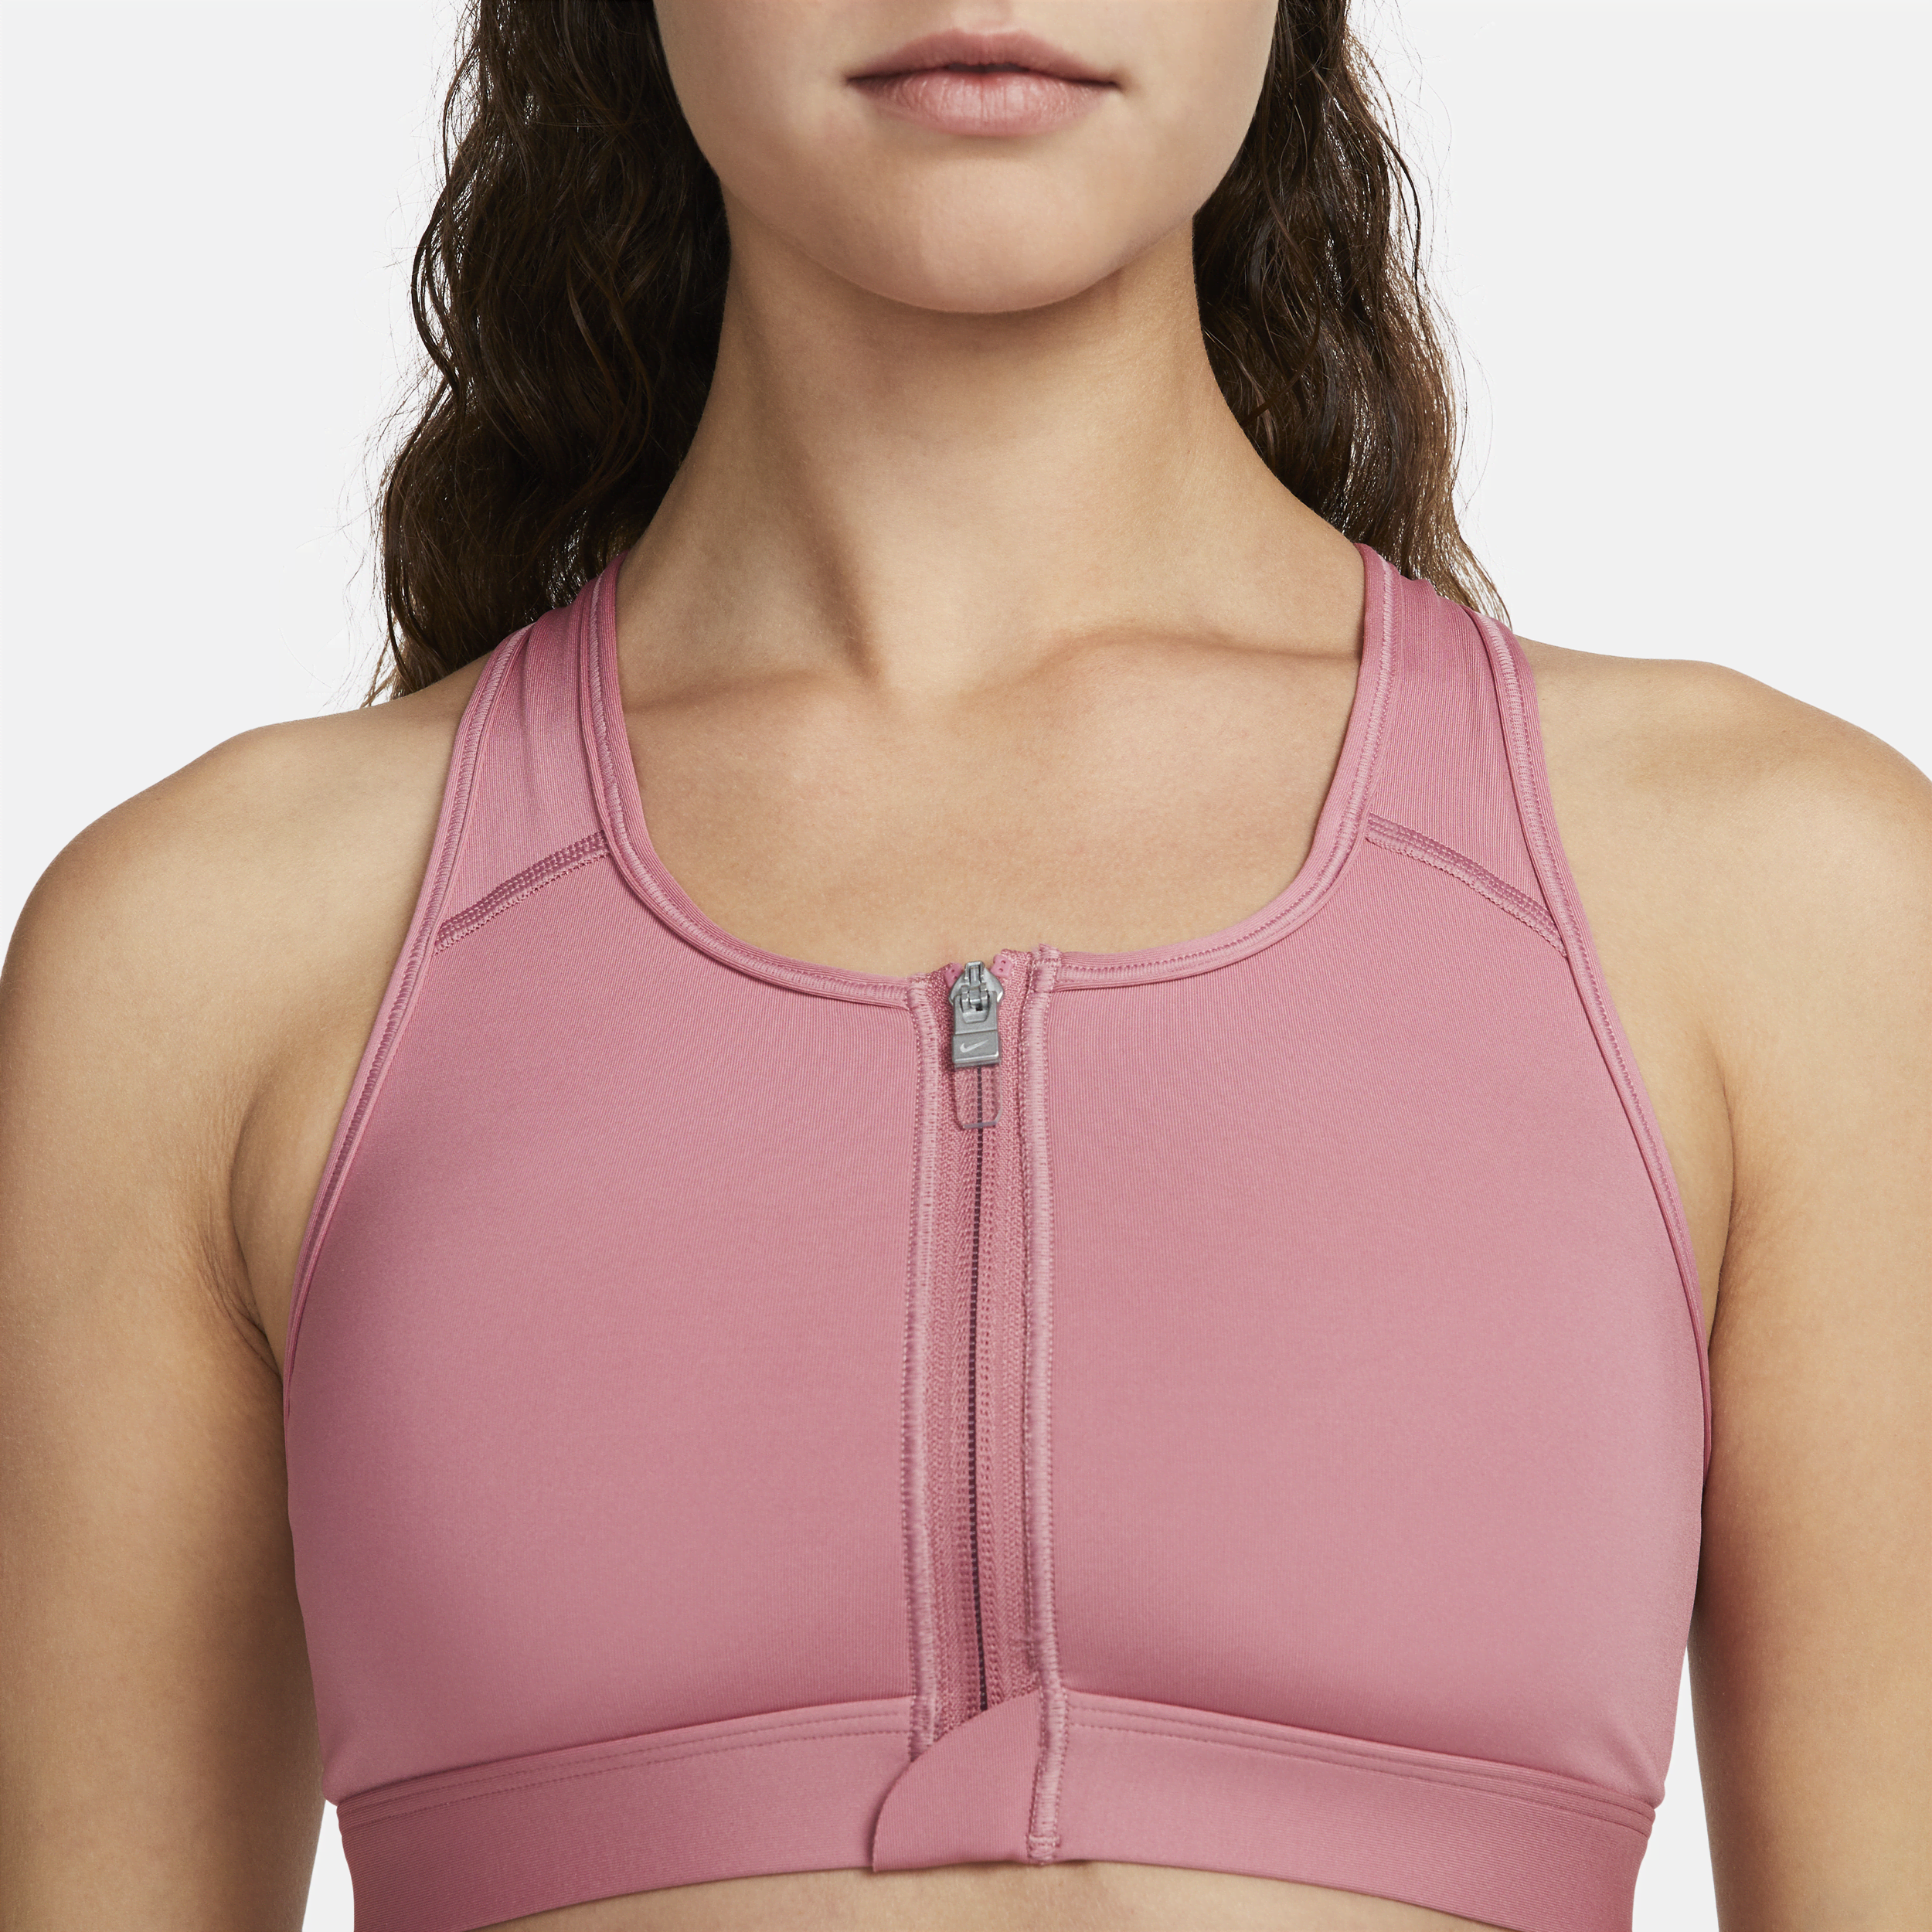  Women's Sports Bras - $25 To $50 / Women's Sports Bras /  Women's Bras: Clothing, Shoes & Jewelry